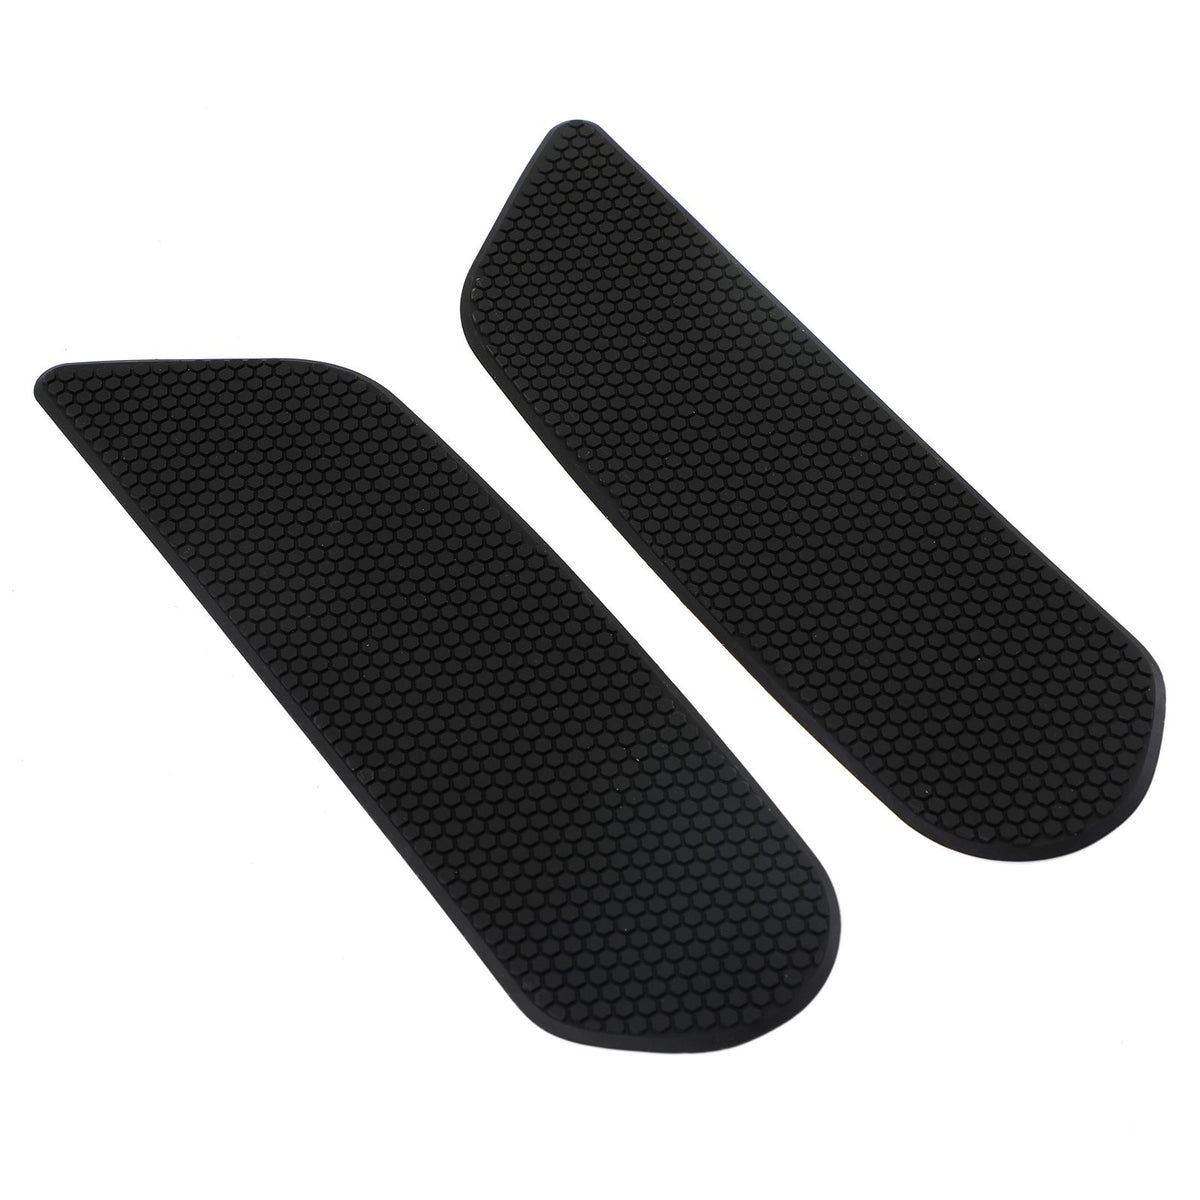 2Pcs Tank Pads Traction Grips Protector Kit Fit For Kawasaki Z900 2017-2020